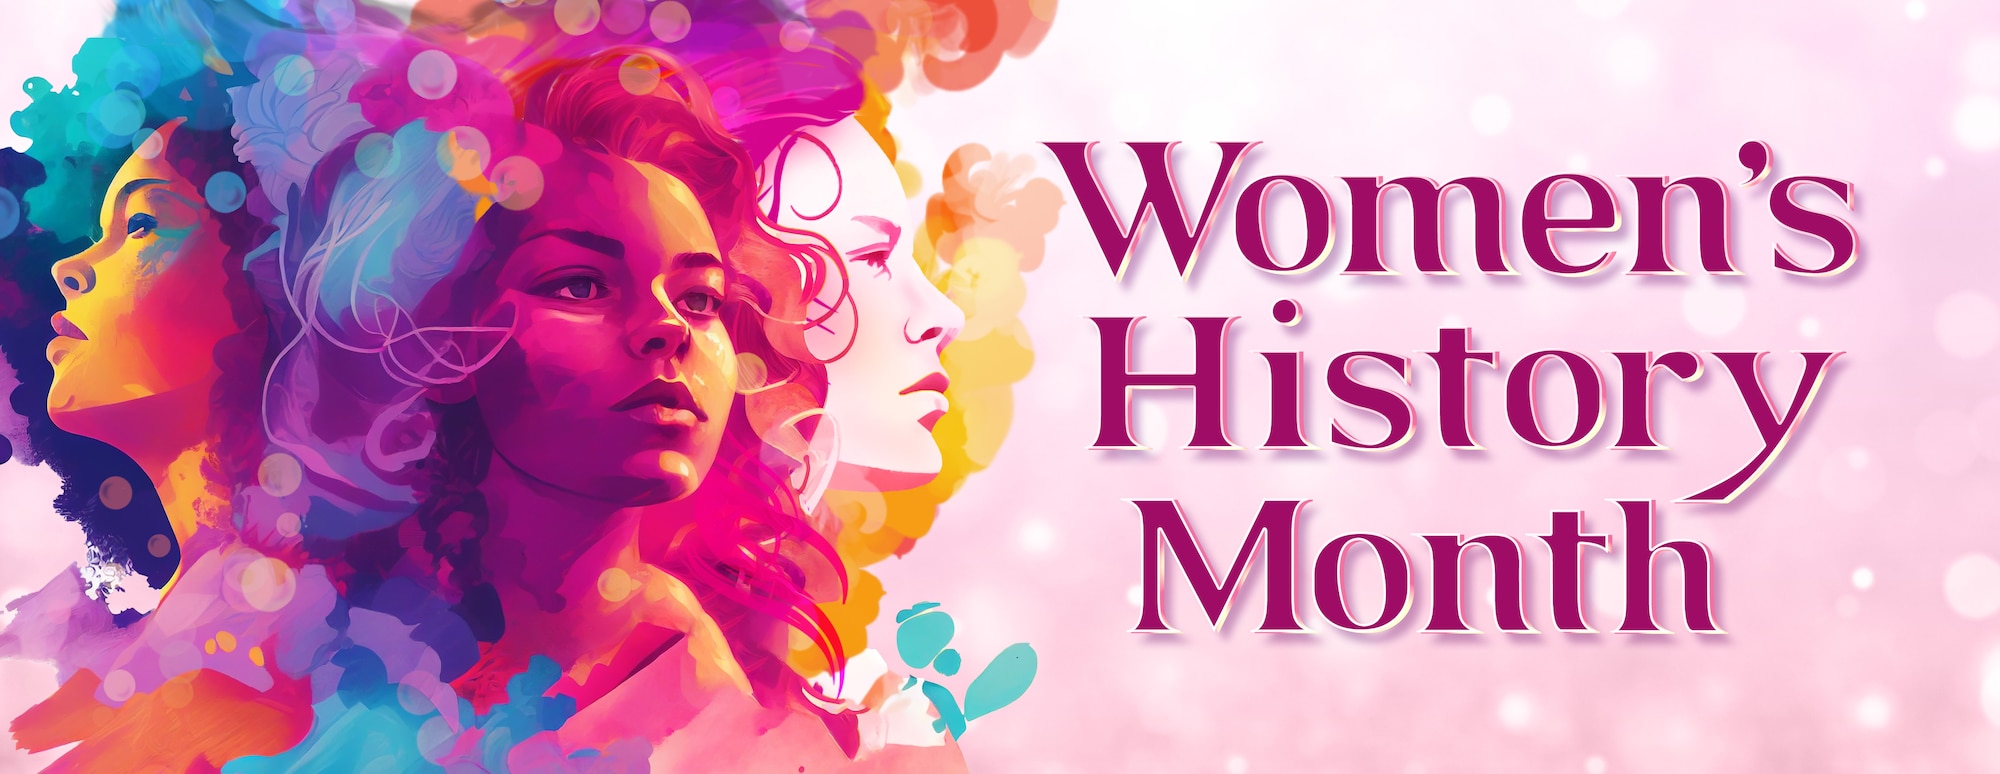 Modified Illustration: diverse display of women’s faces in splashes of bright colors celebrating Women's History Month